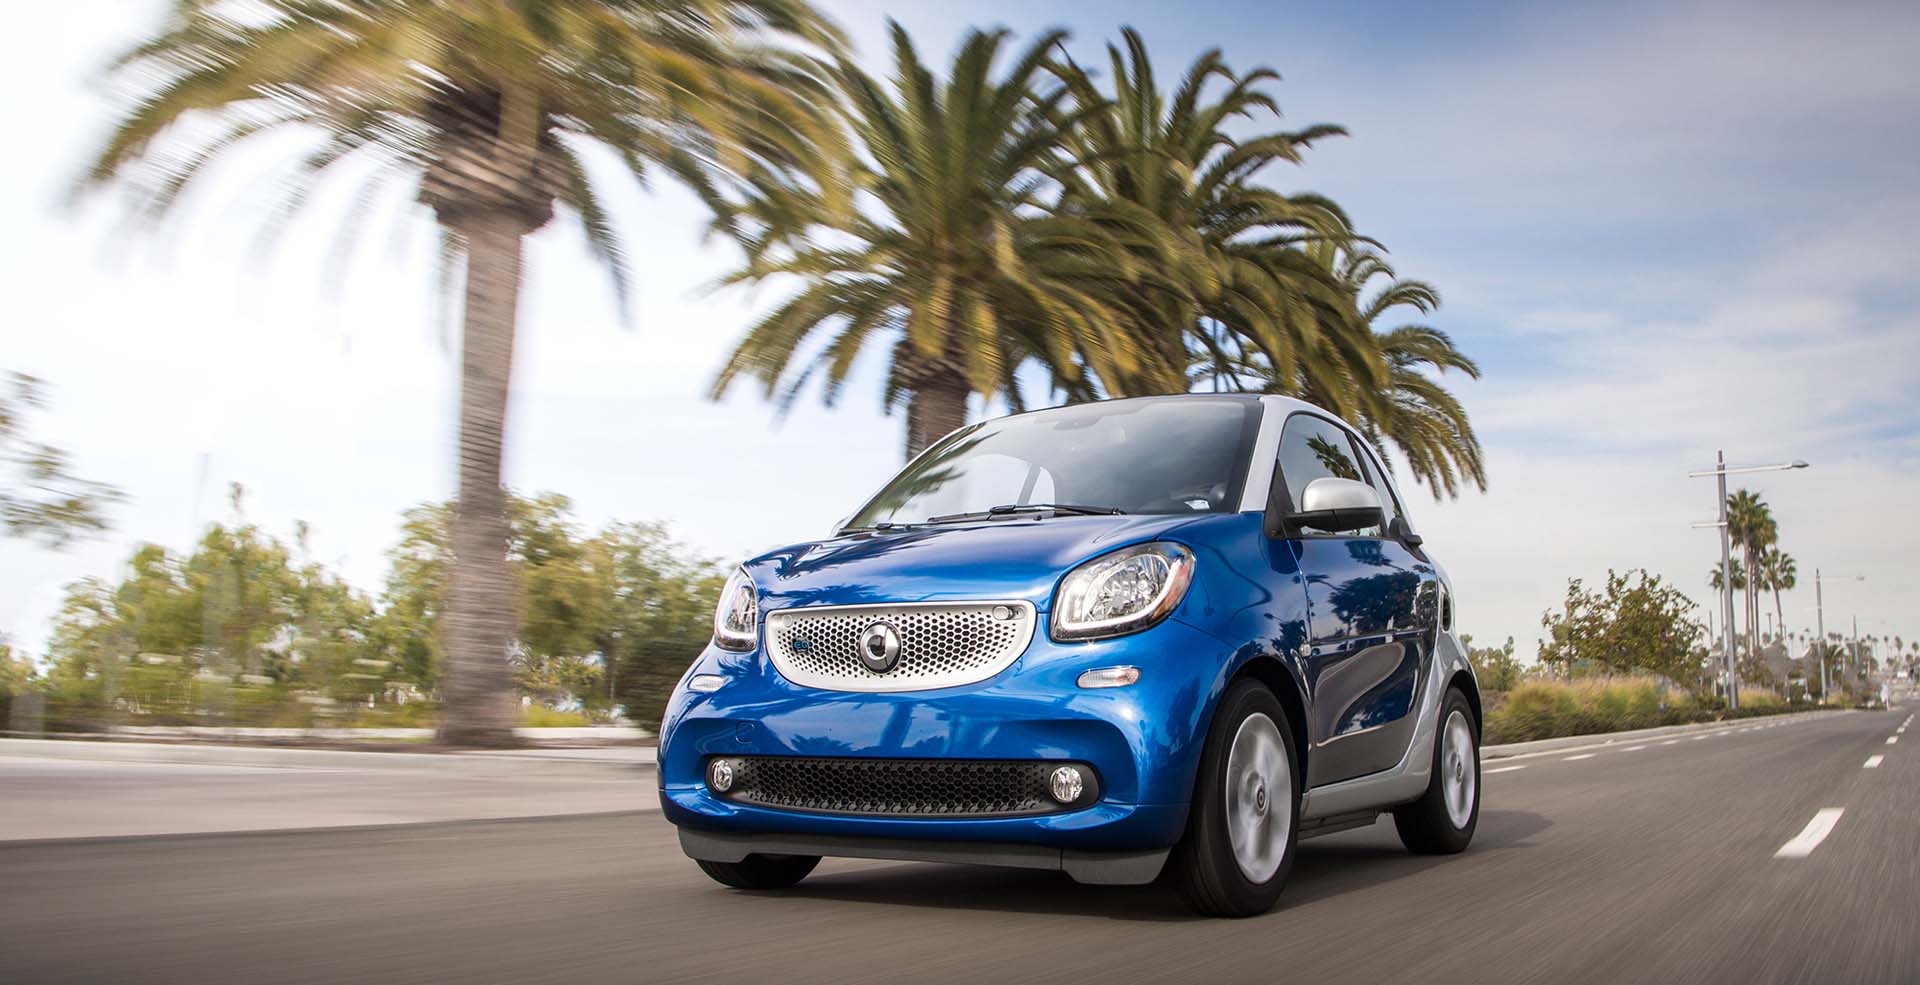 2019 smart fortwo Review: Prices, Specs, and Photos - The Car Connection